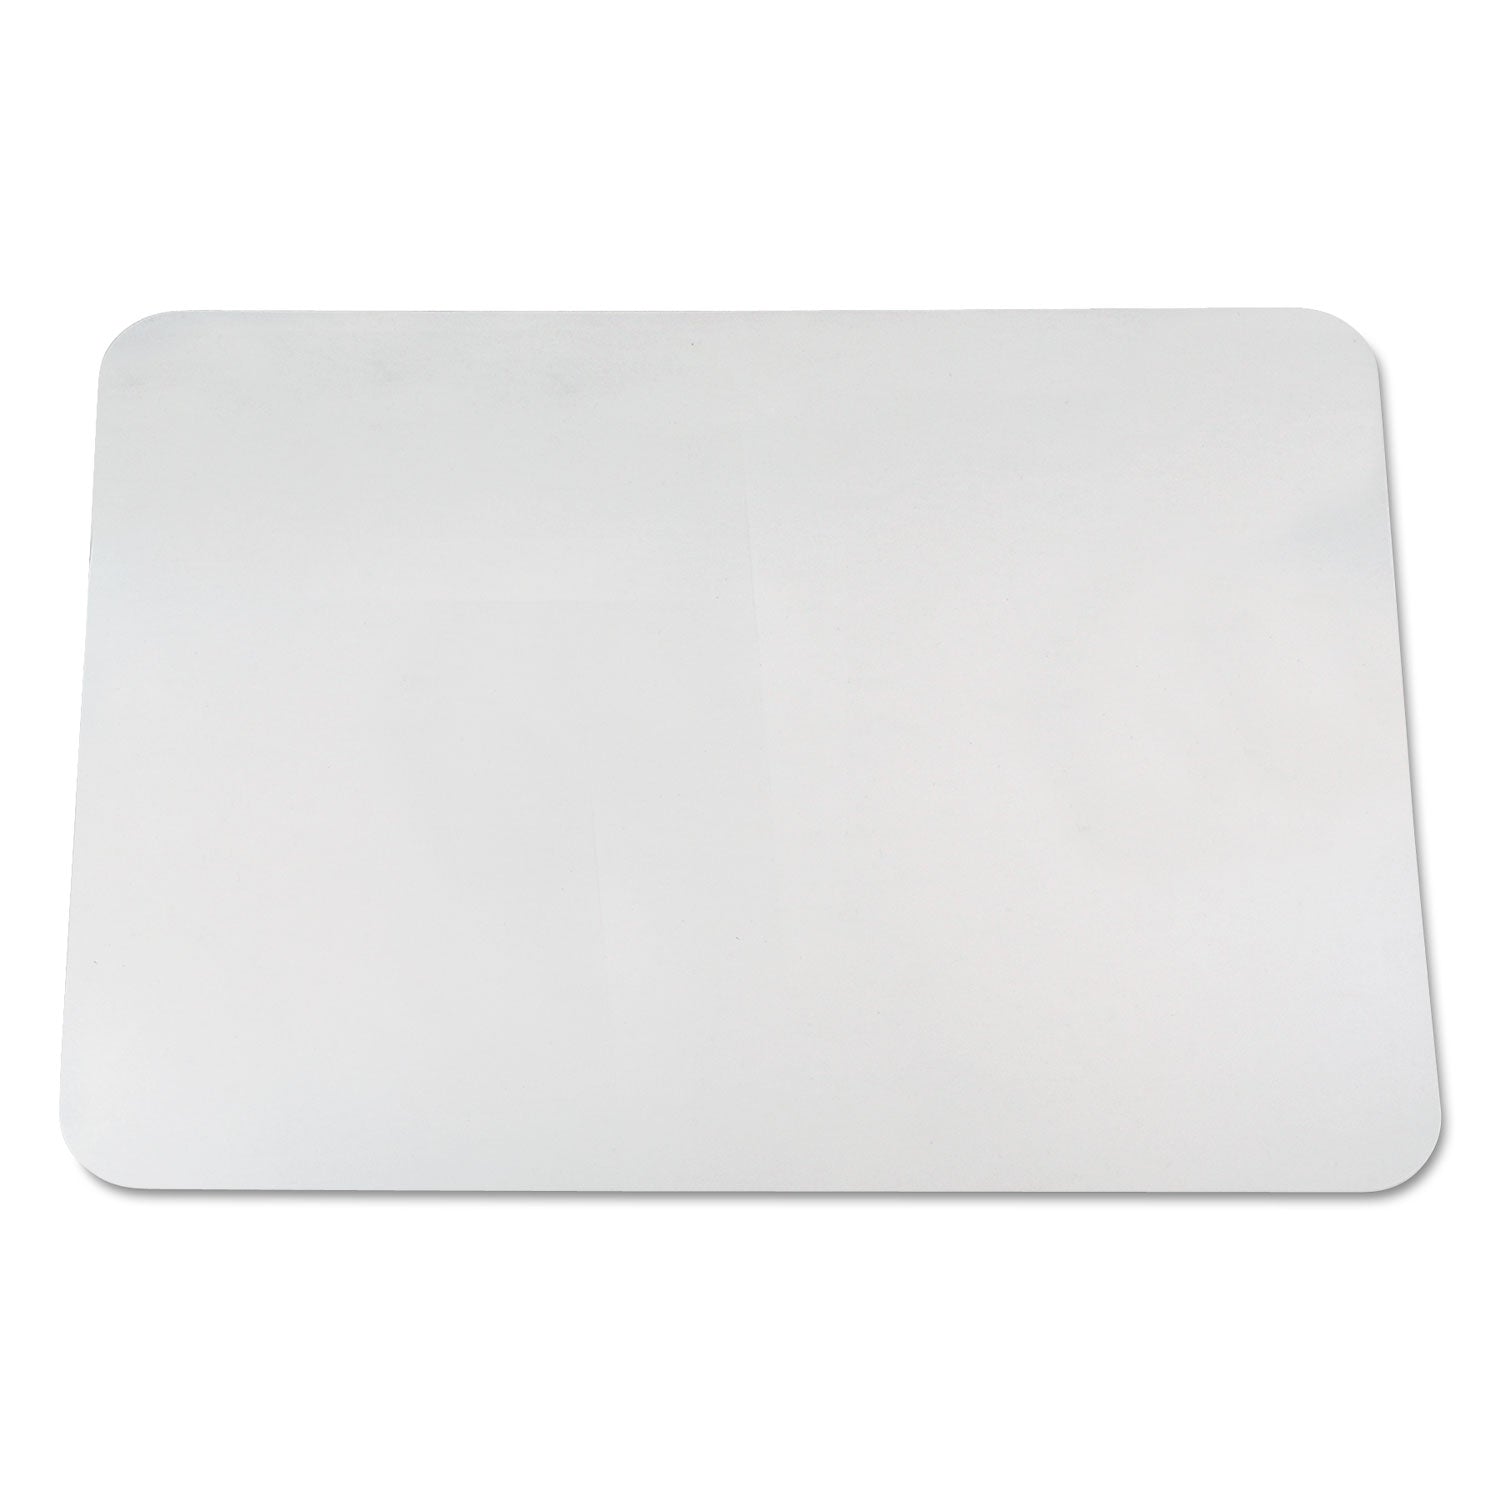 KrystalView Desk Pad with Antimicrobial Protection, Glossy Finish, 38 x 24, Clear - 